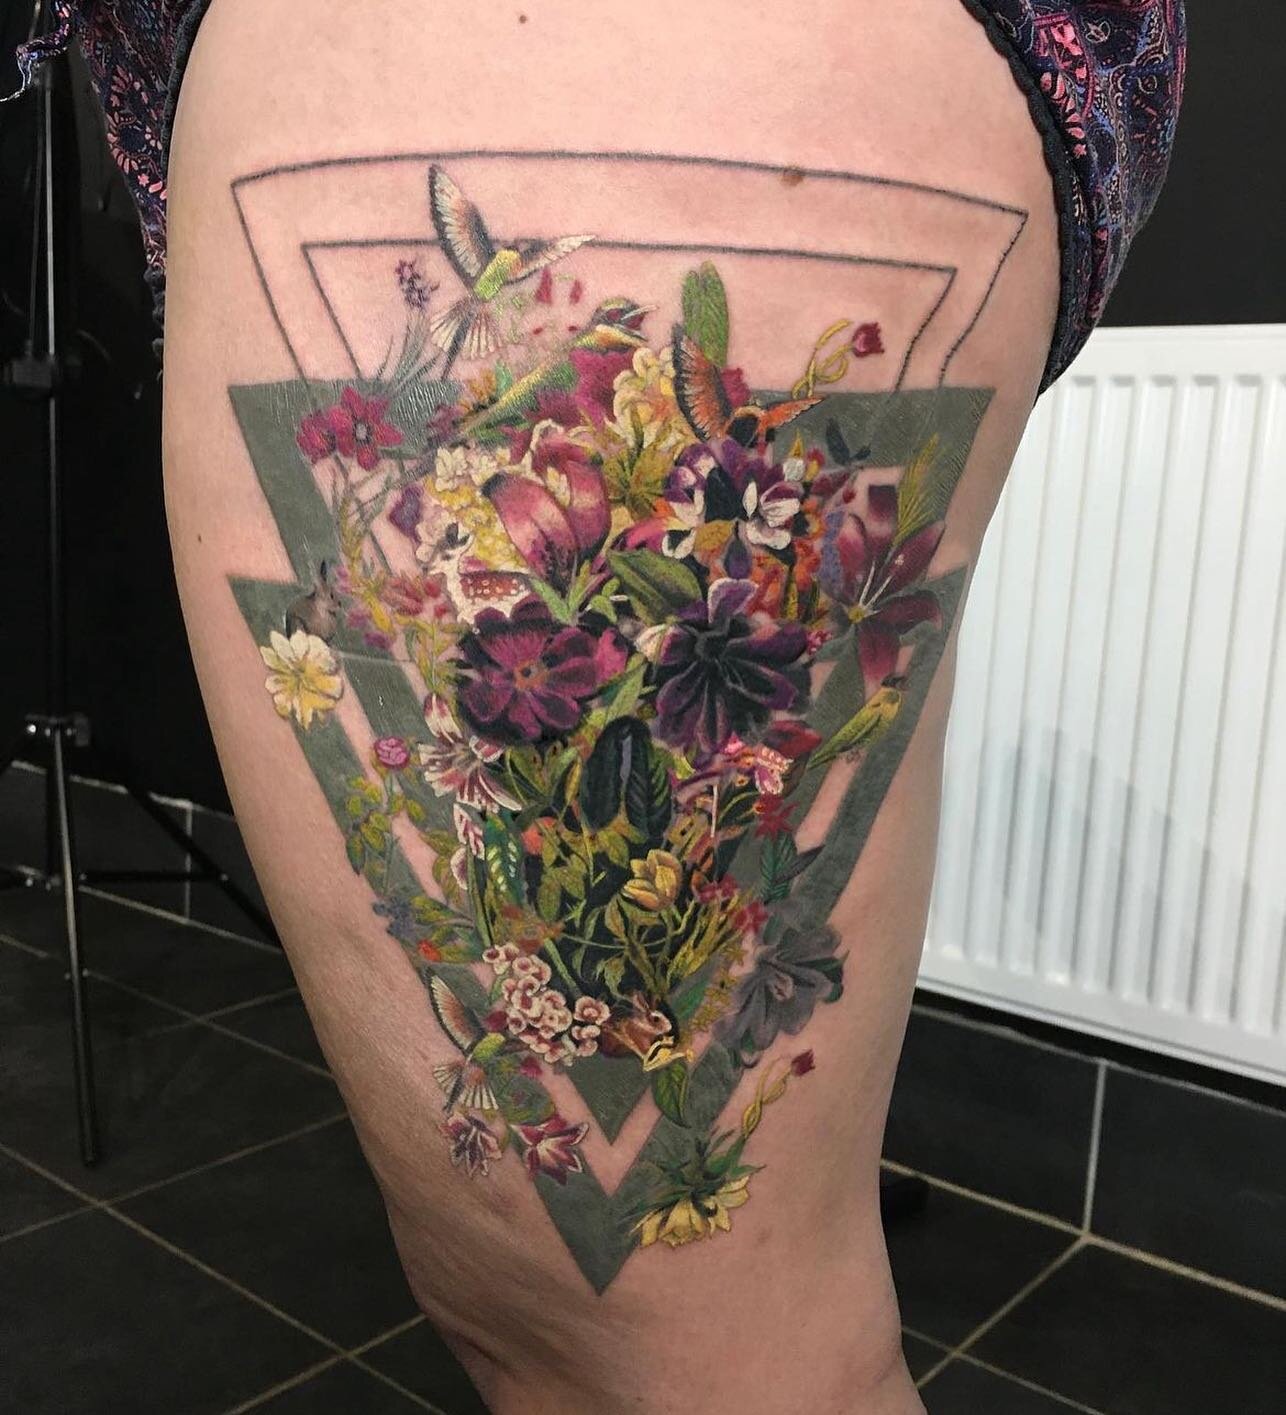 We are pleased to announce @daisyjane1978 from @artfusion13doncaster will be working @skindeep_uk Tattoo Freeze 2023🥶4th-5th February 2023, Telford International Centre, Telford.

To book in with Lisa please drop a DM

#tattooconventions #tattooeven